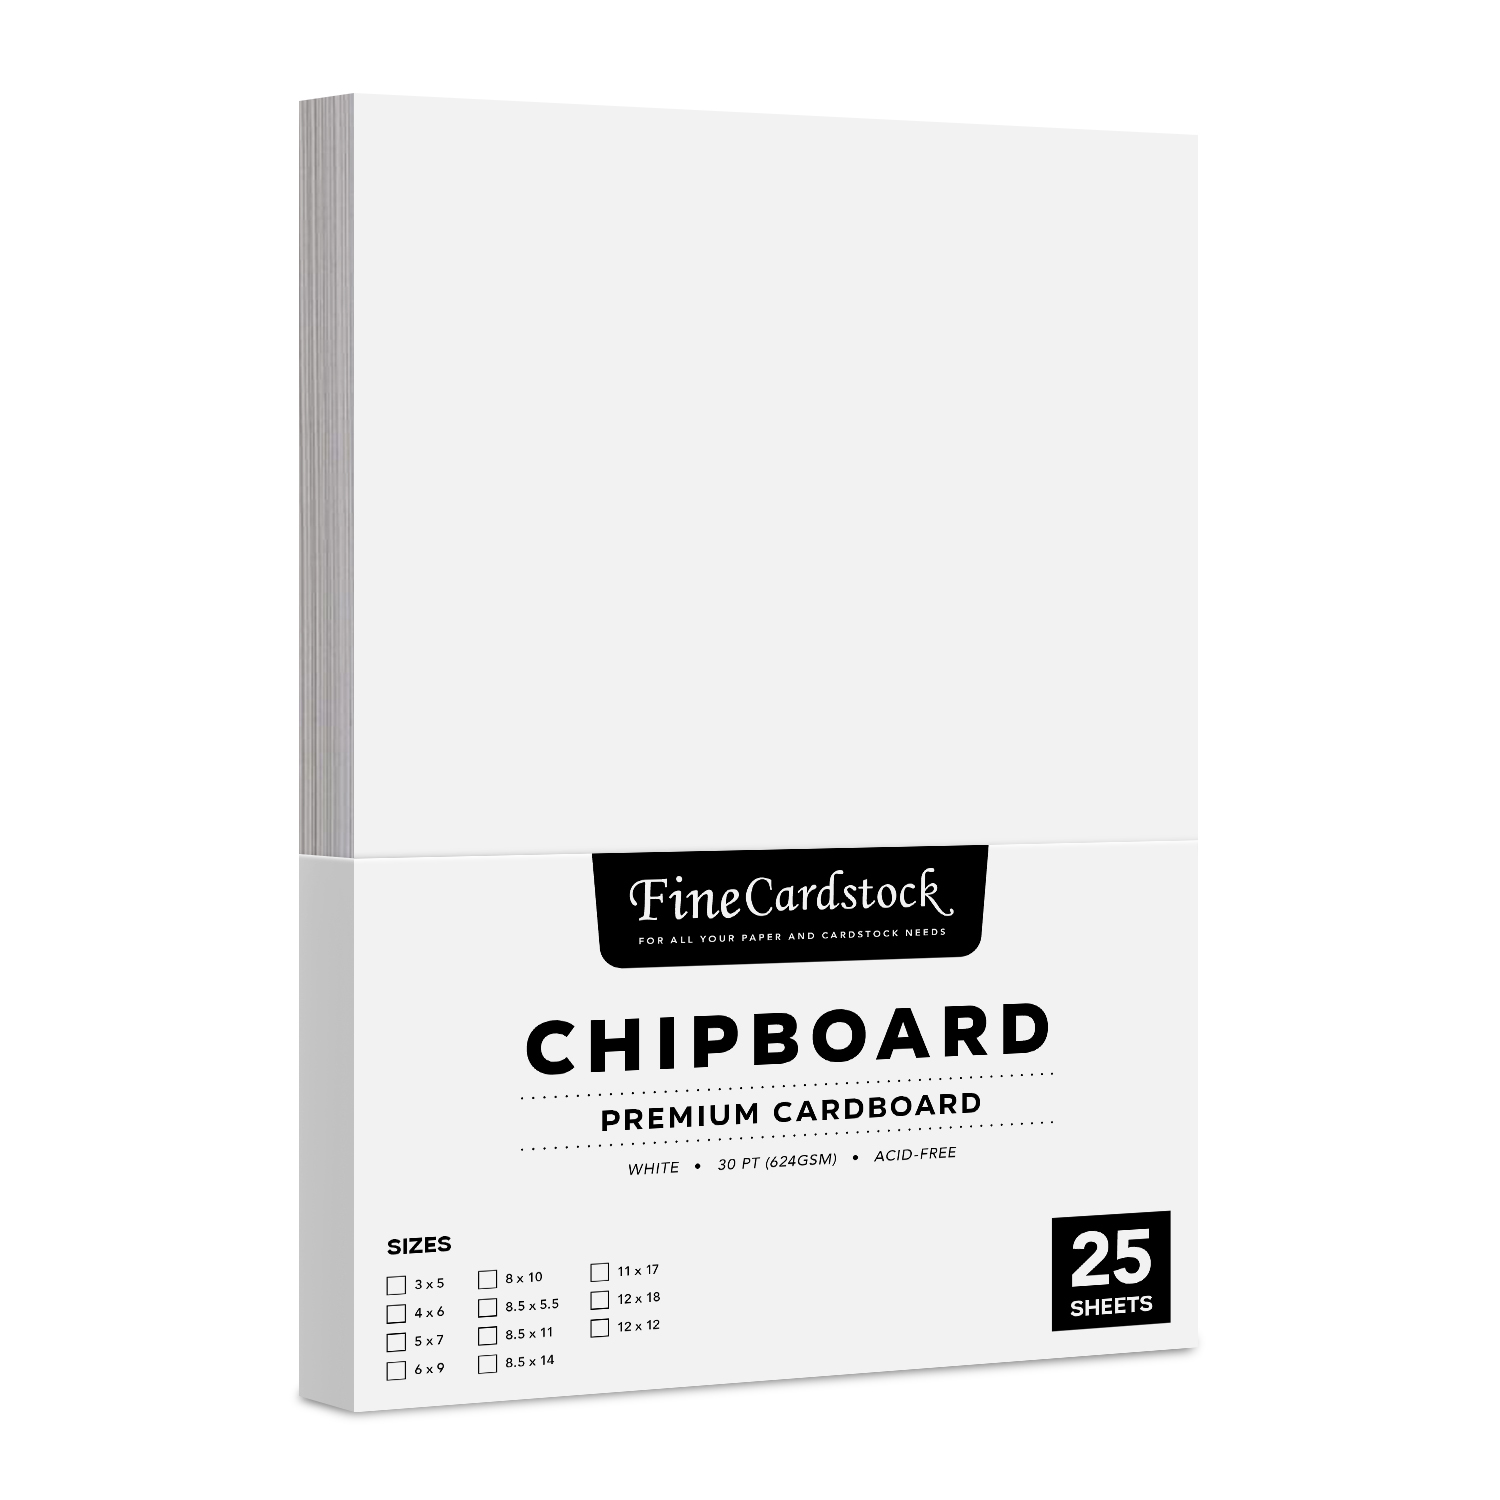  100 Chipboard Sheets 8.5 X 11 Inch - 30pt